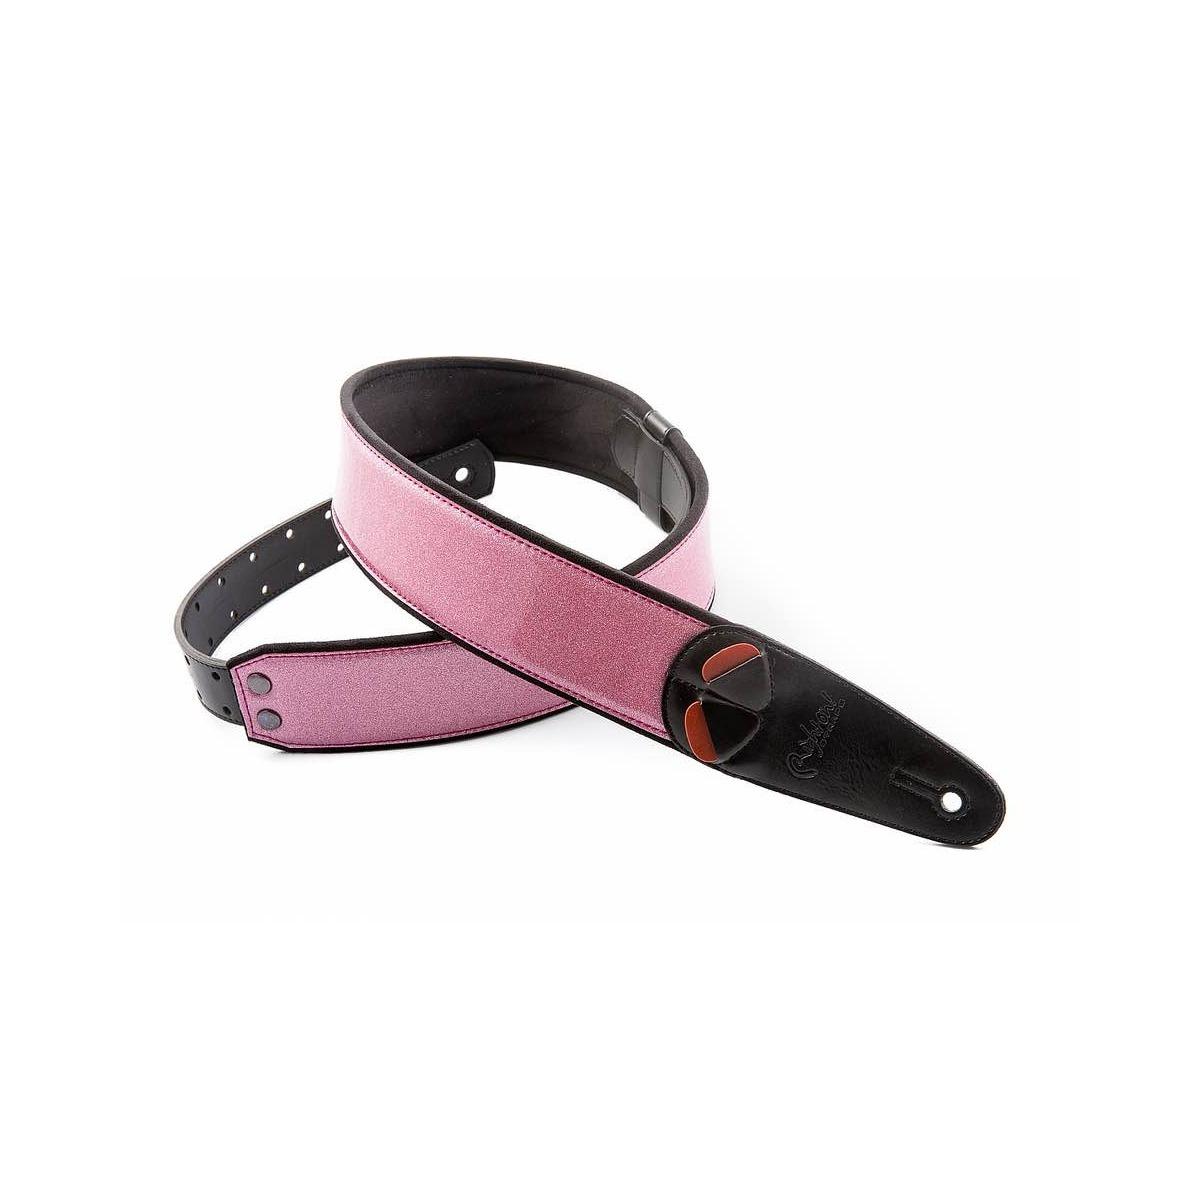 Right on straps stardust pink